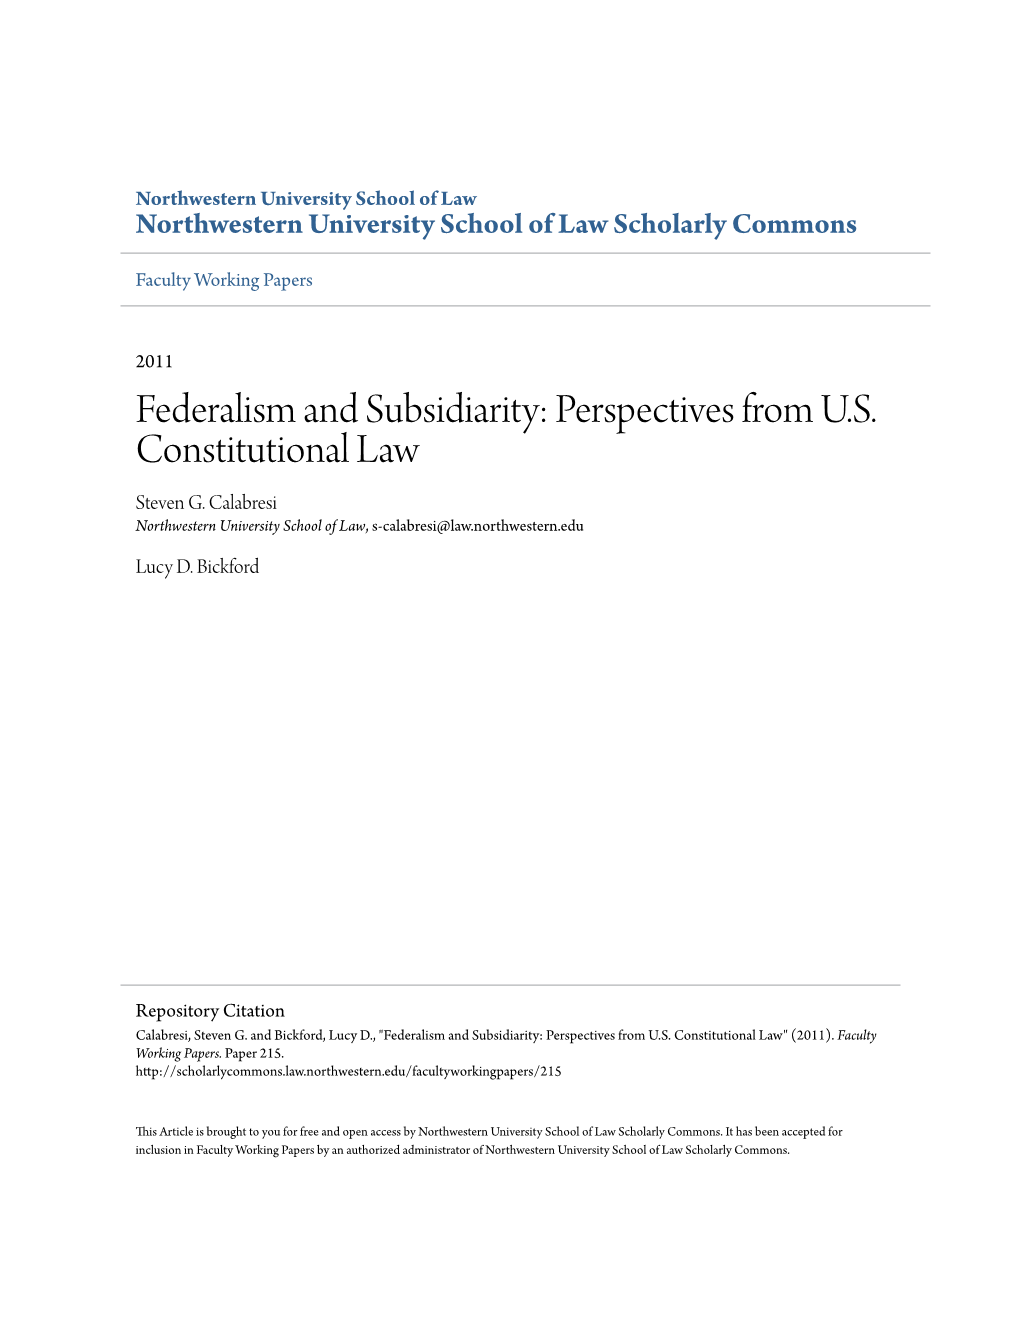 Federalism and Subsidiarity: Perspectives from US